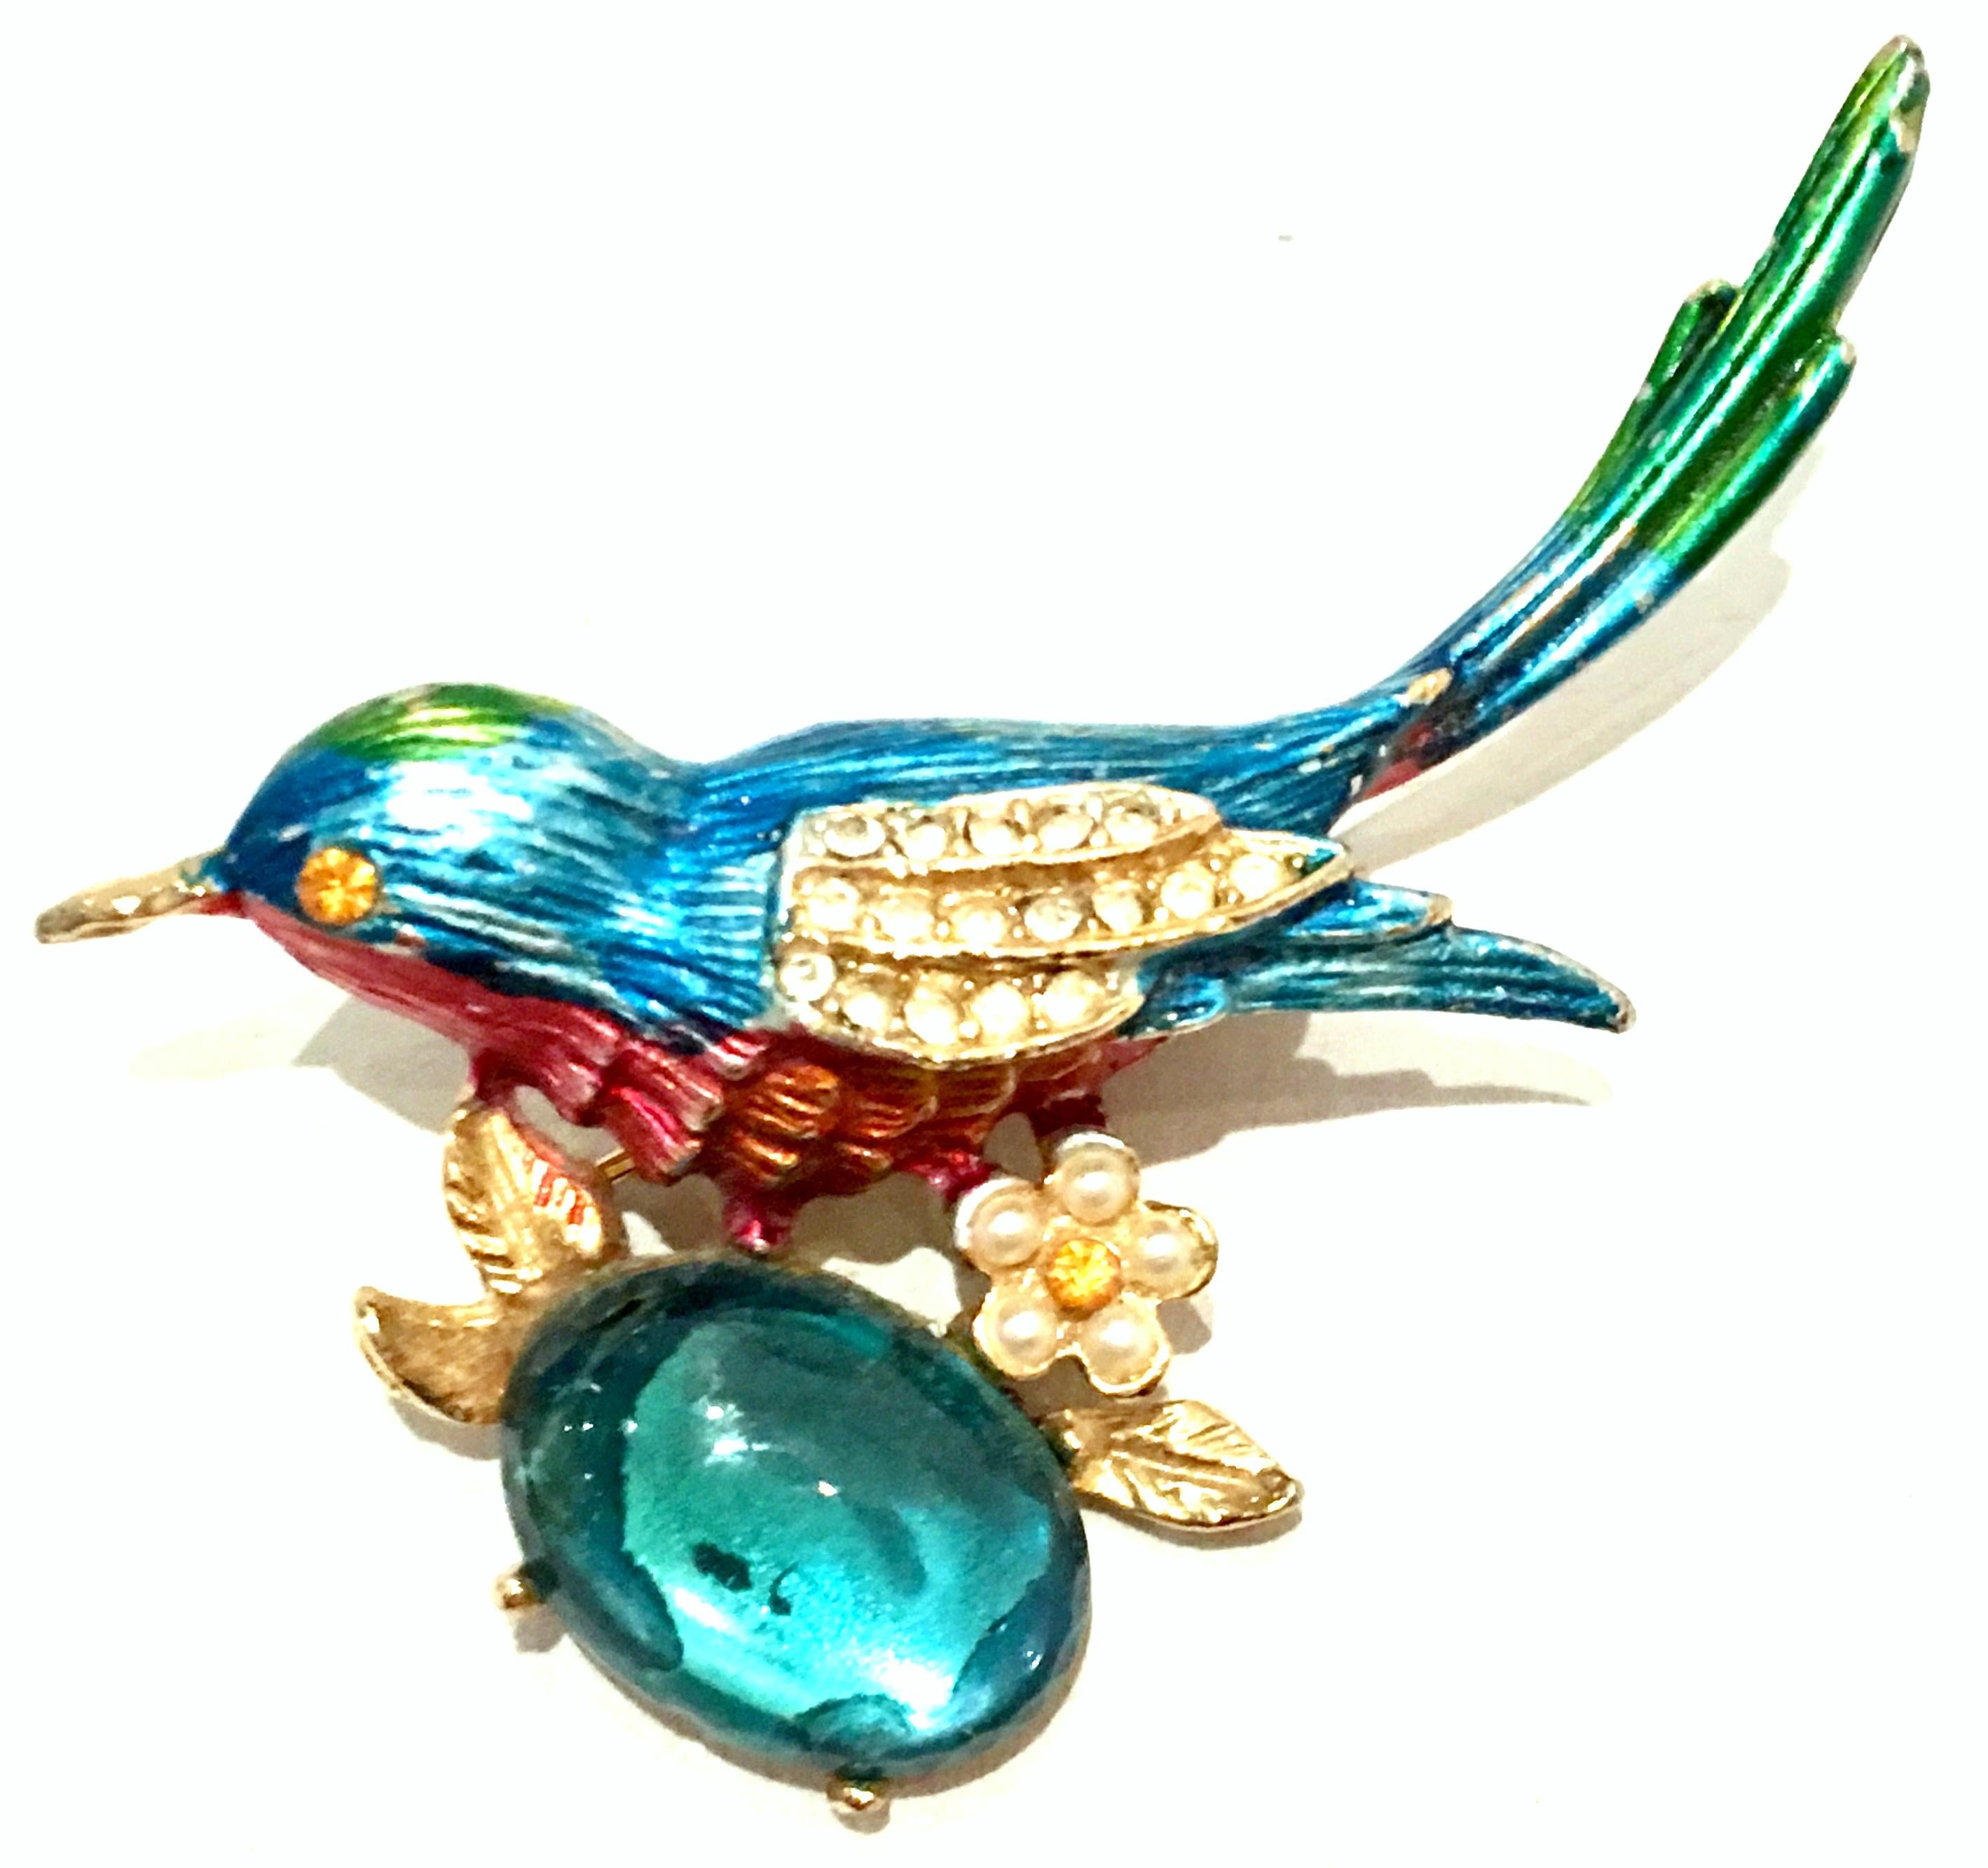 20th Century Gold Plate , Enamel & Austrian Crystal Hummingbird Brooch. Features a gold plate metal base with hand painted vivid shaded of enamel, large central fancy prong set Austrian crystal blue topaz stone with translucent pave set detail.. The